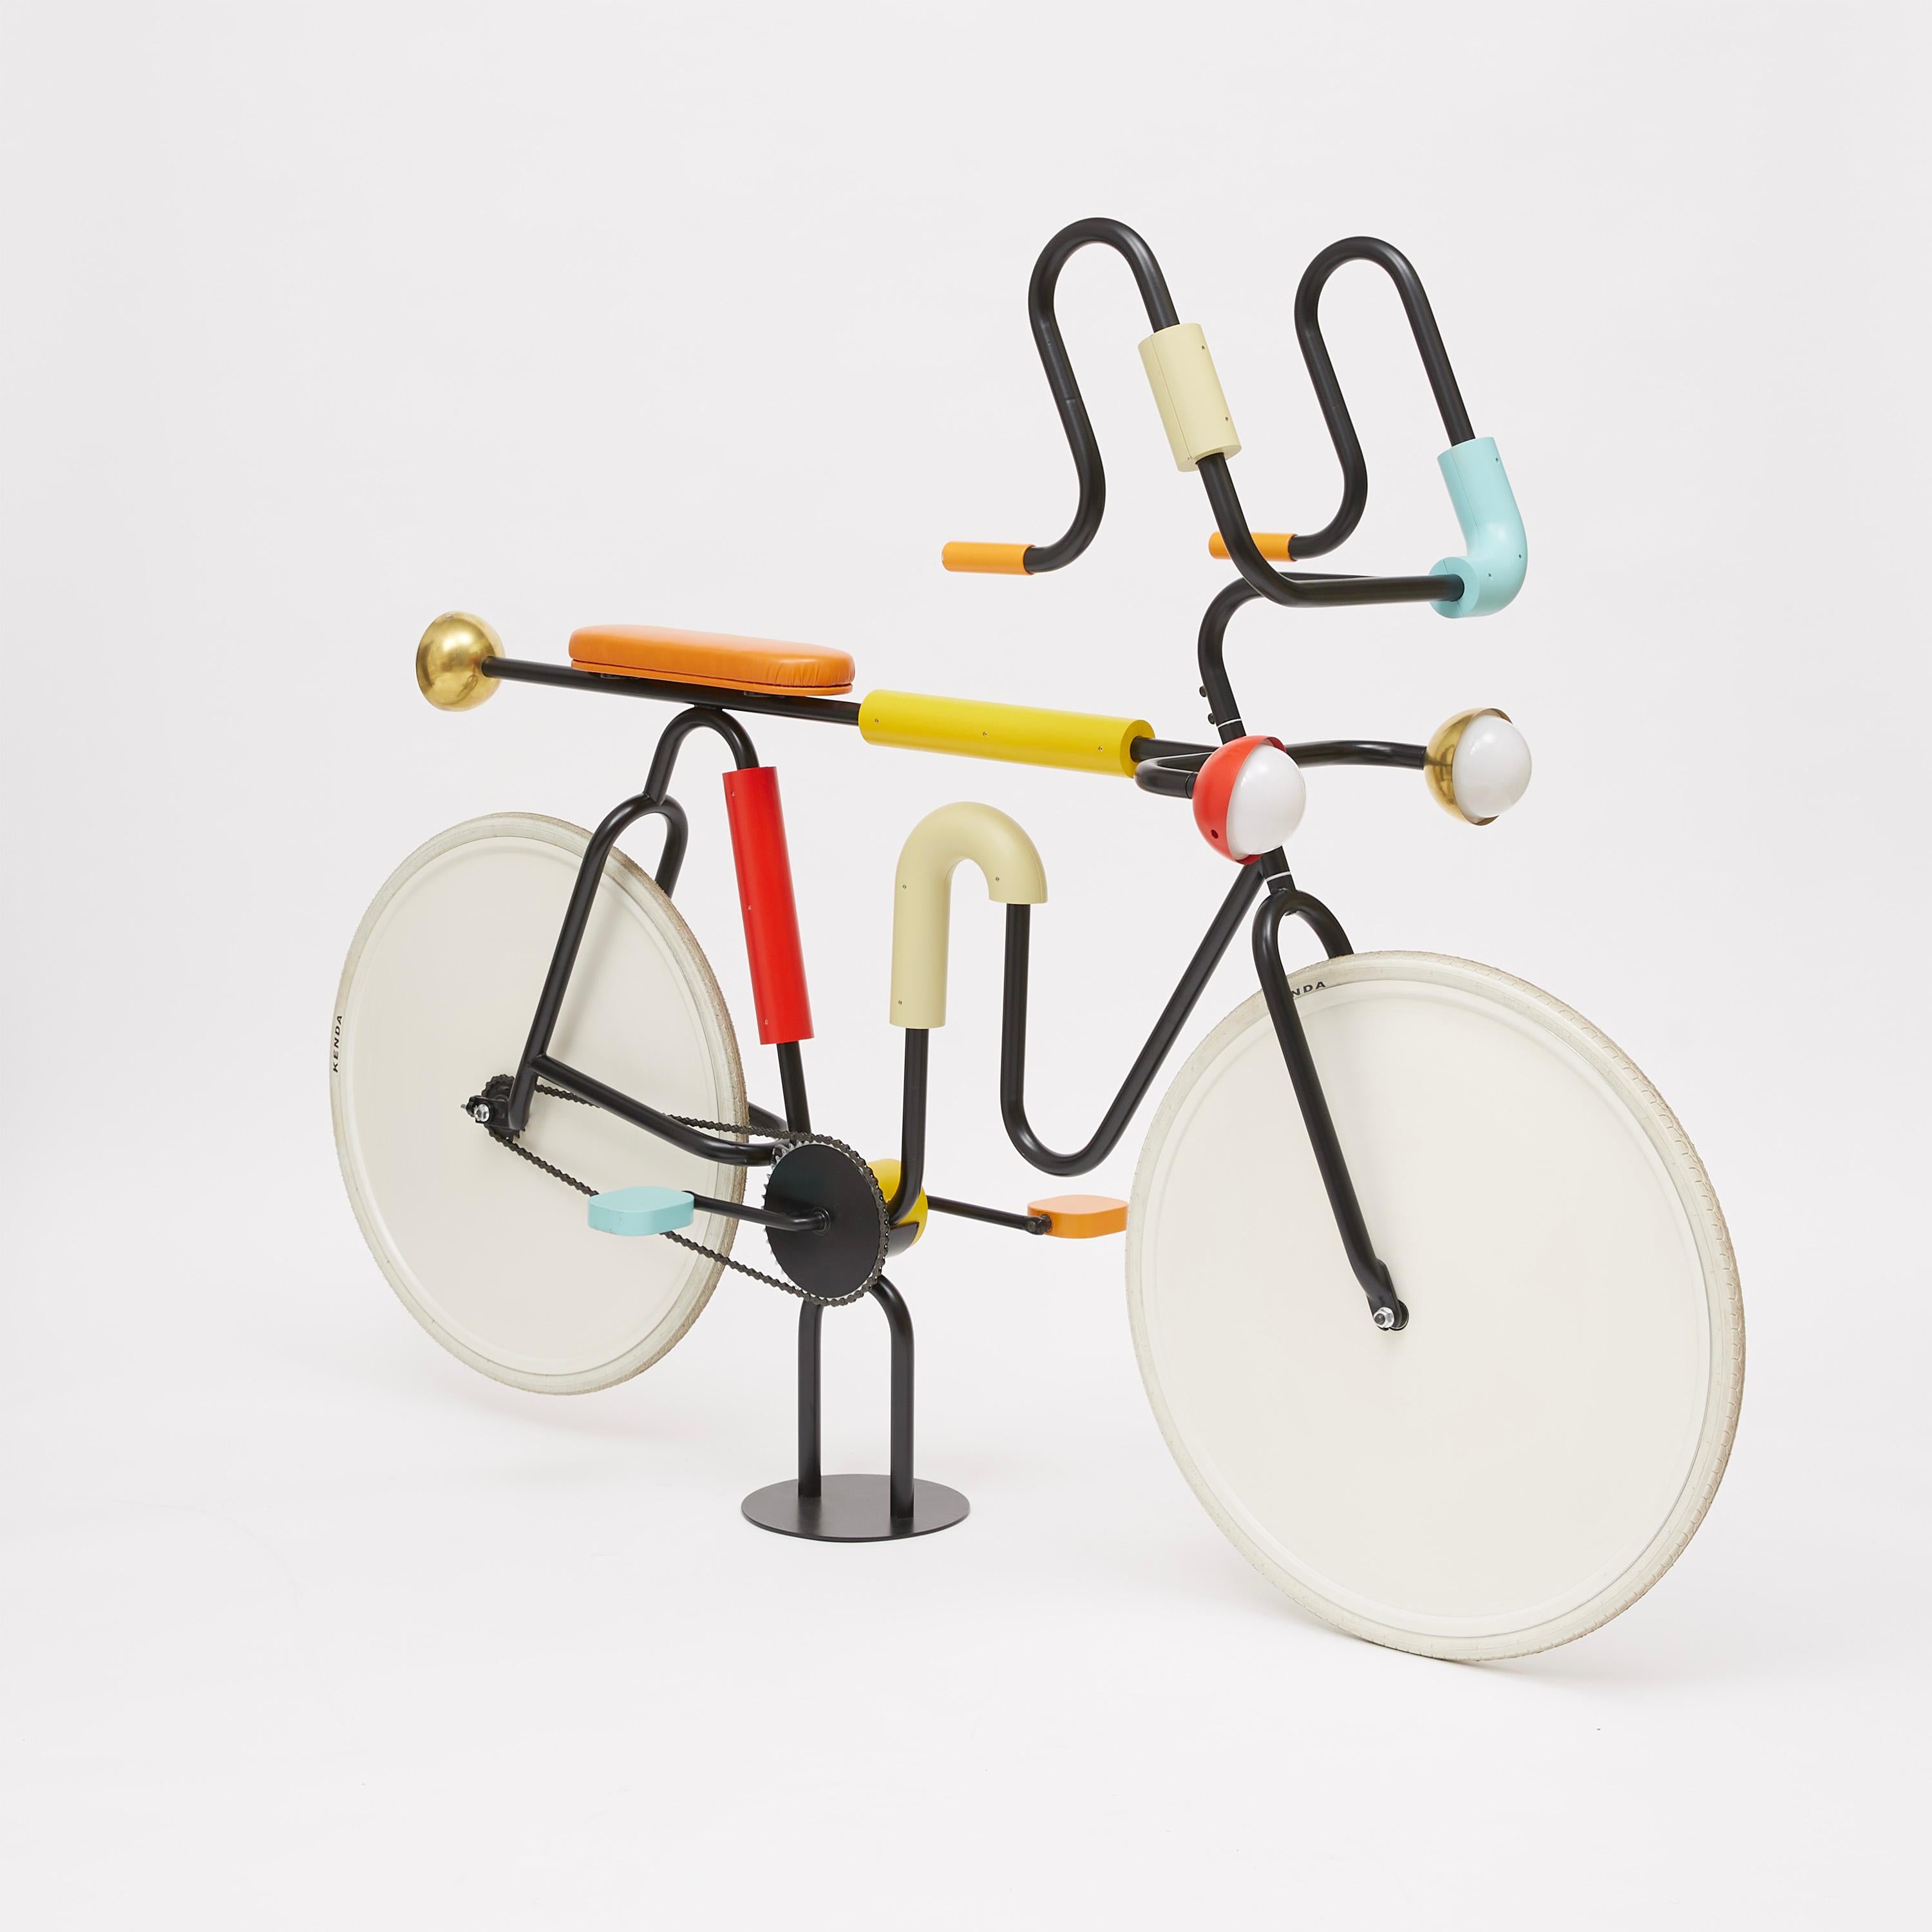 This eccentric design from the Morse Collection reinterprets the silhouette of a bike in a playful, dramatized version rich in colorful tubes and geometric references. A superb addition to a contemporary interior where one wants to concentrate